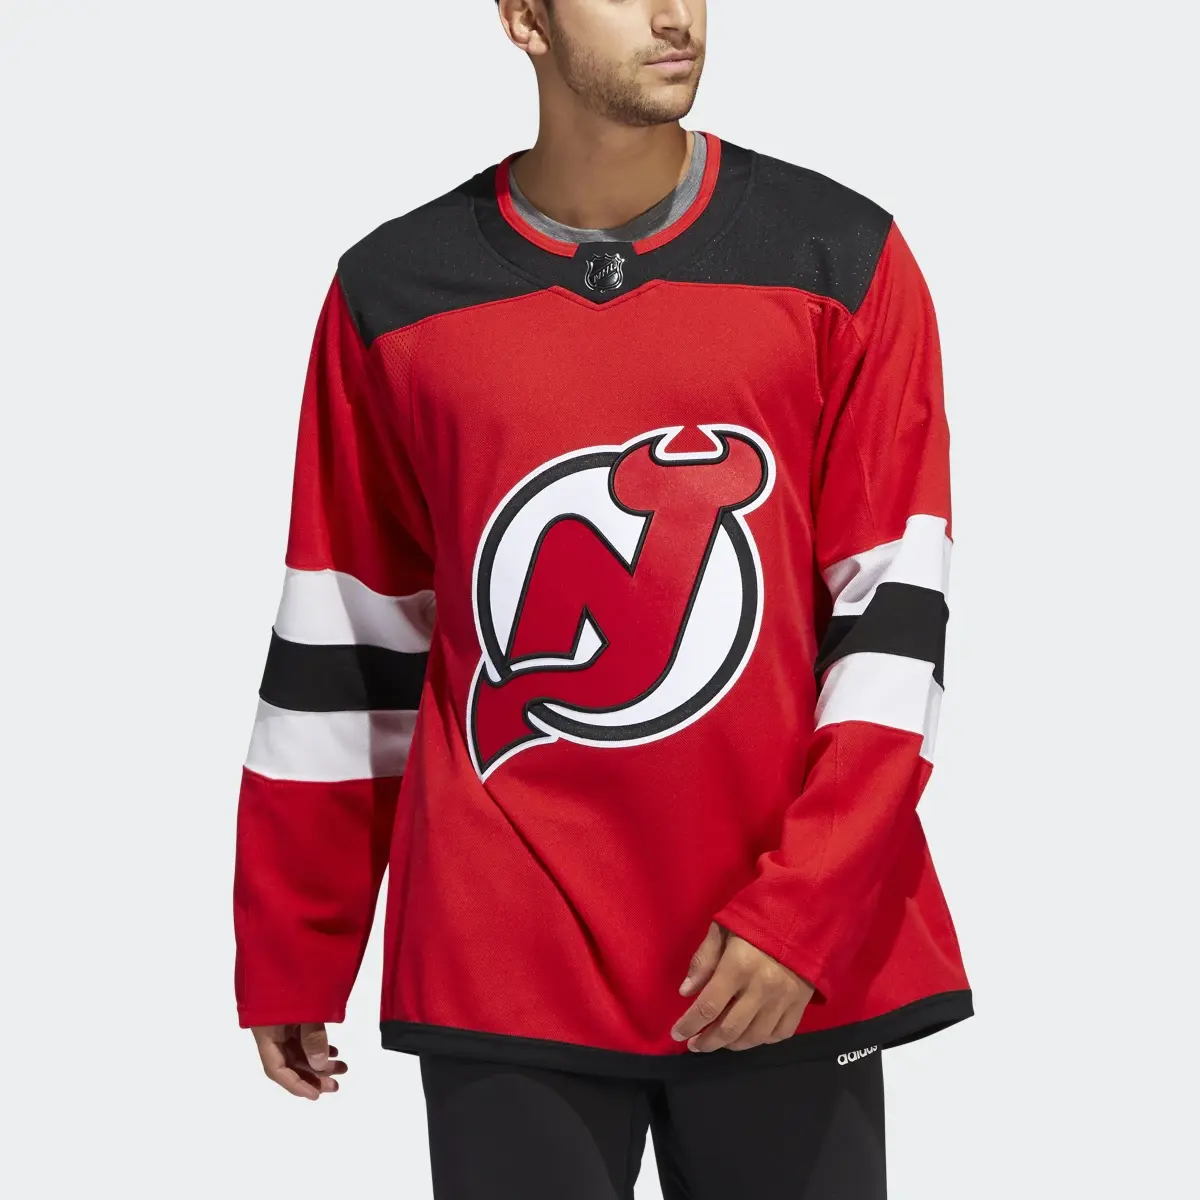 Adidas Devils Home Authentic Jersey. 1